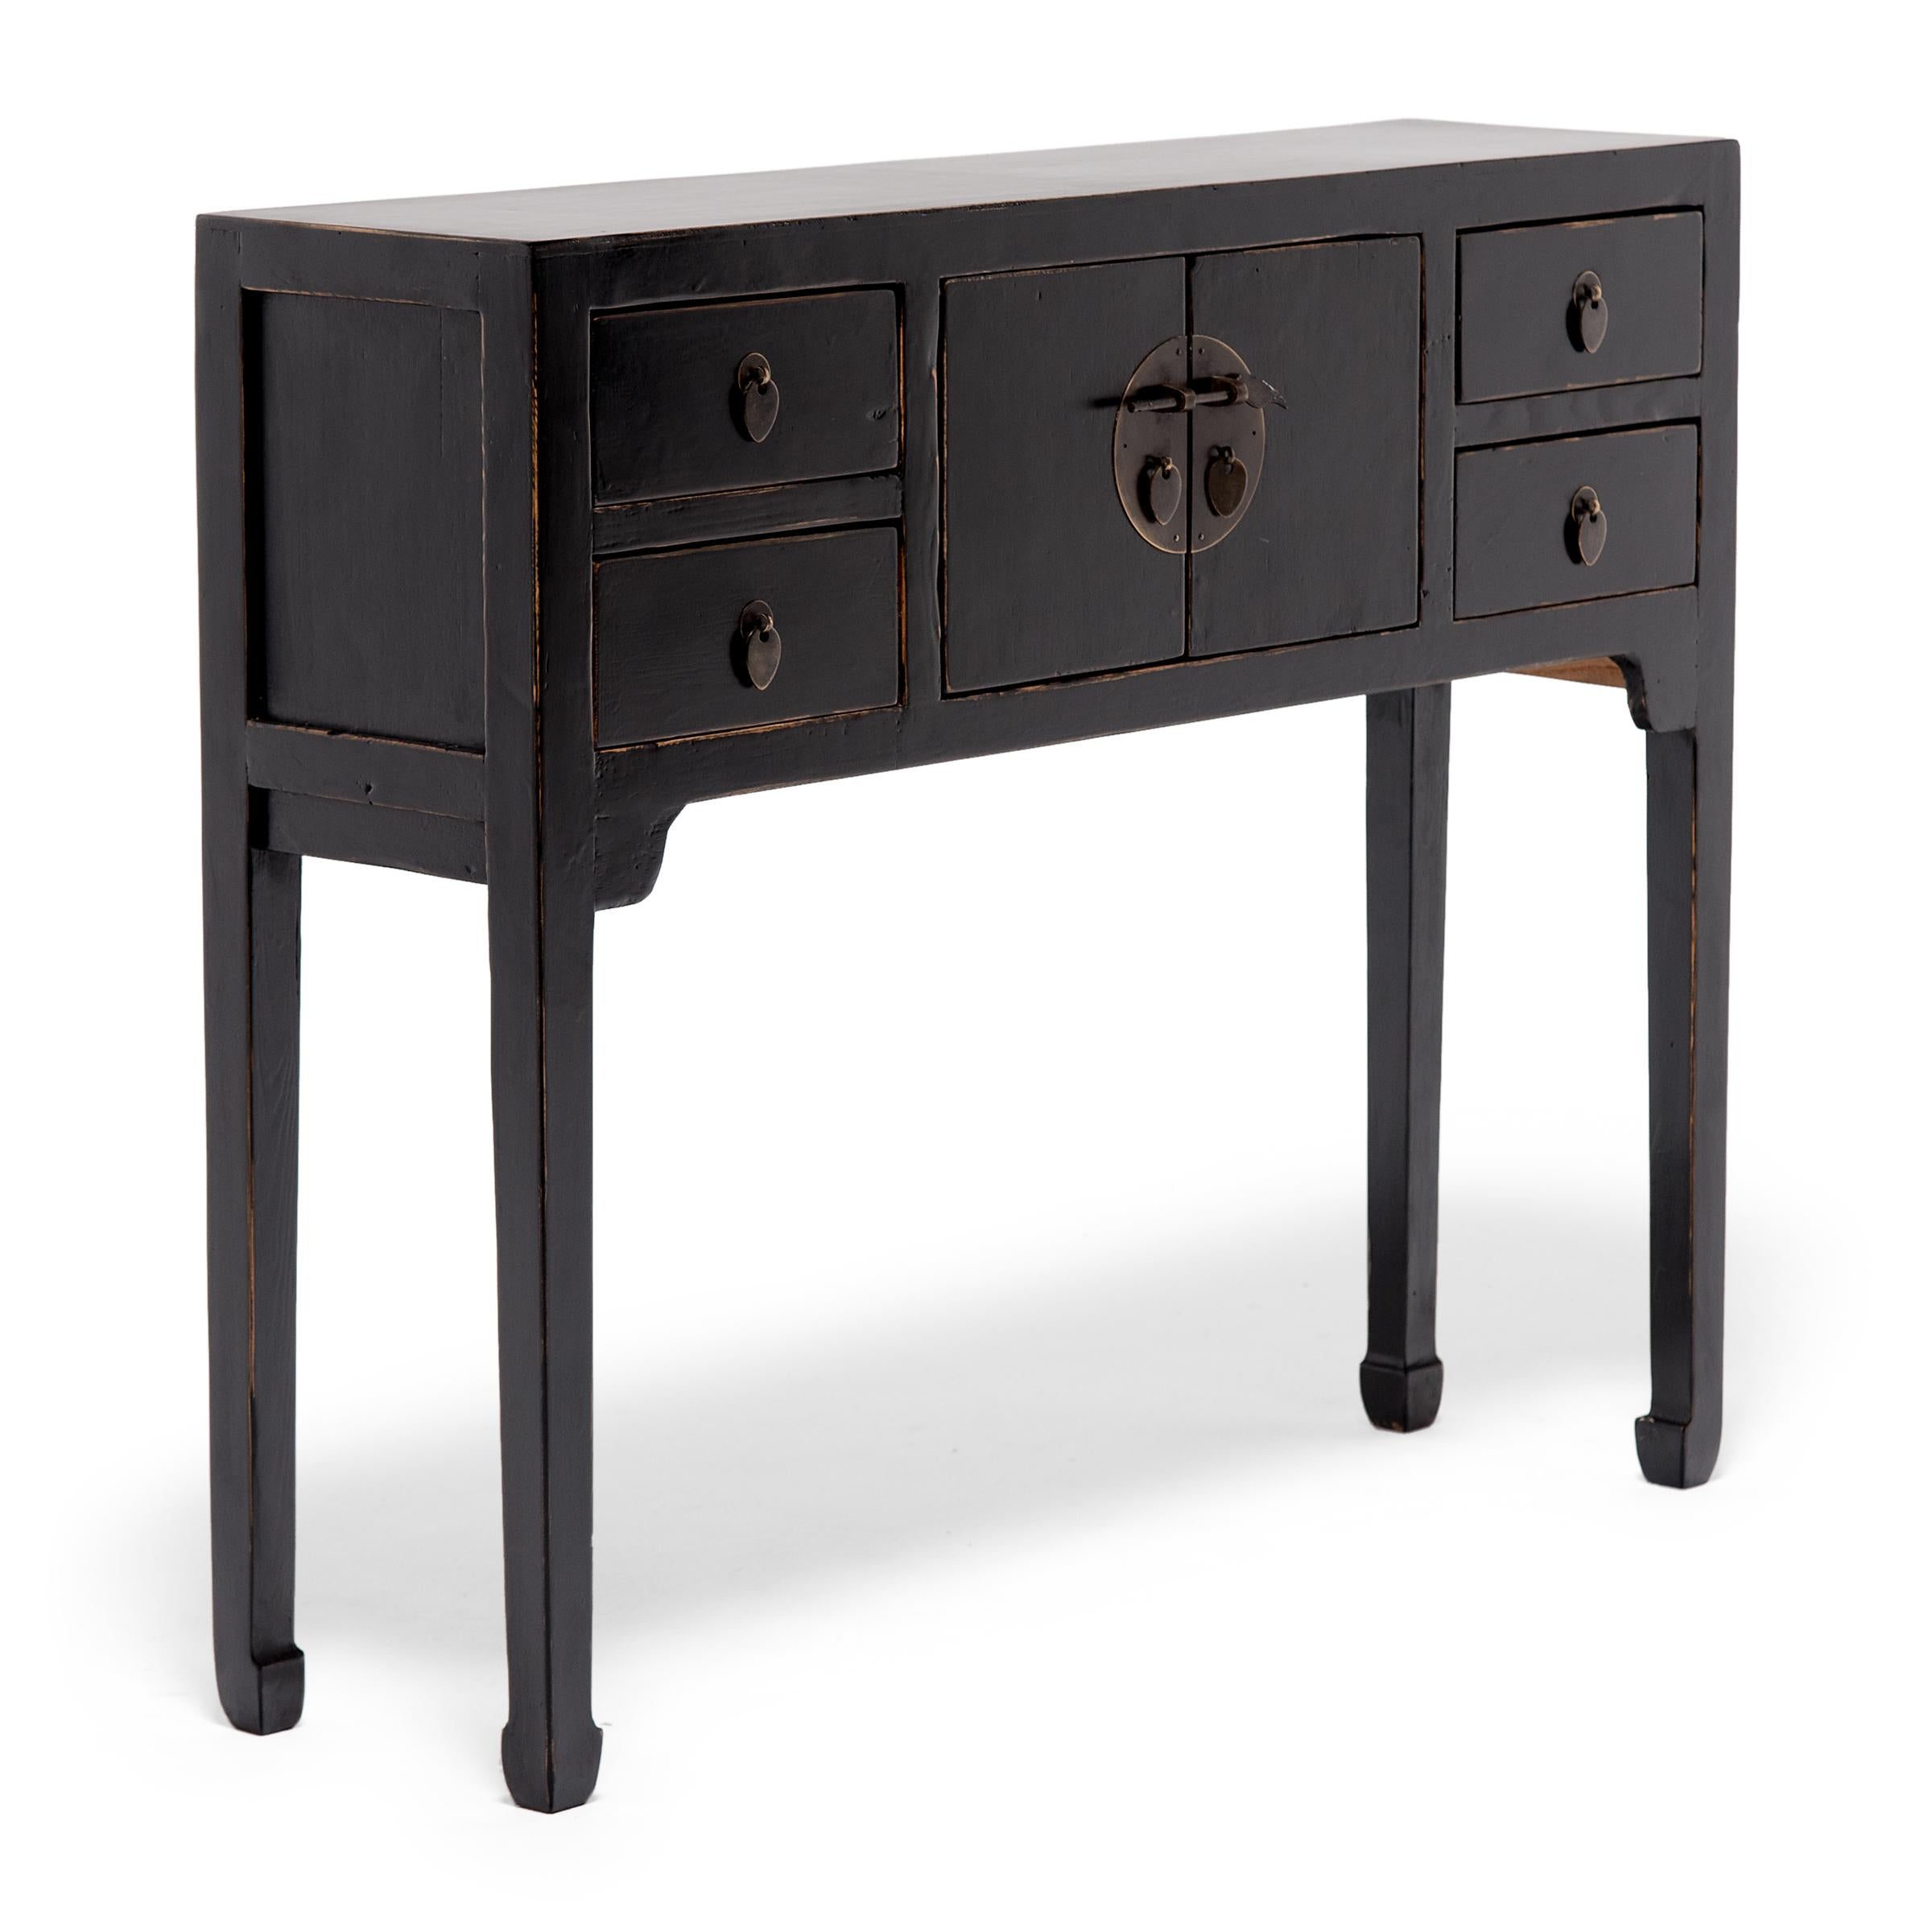 This black lacquer altar coffer keeps with the style of Ming-dynasty furniture through its clean lines and minimal ornamentation. The slim legs and delicate hoof feet bring the eye upwards the squared frame and contribute to the effortless